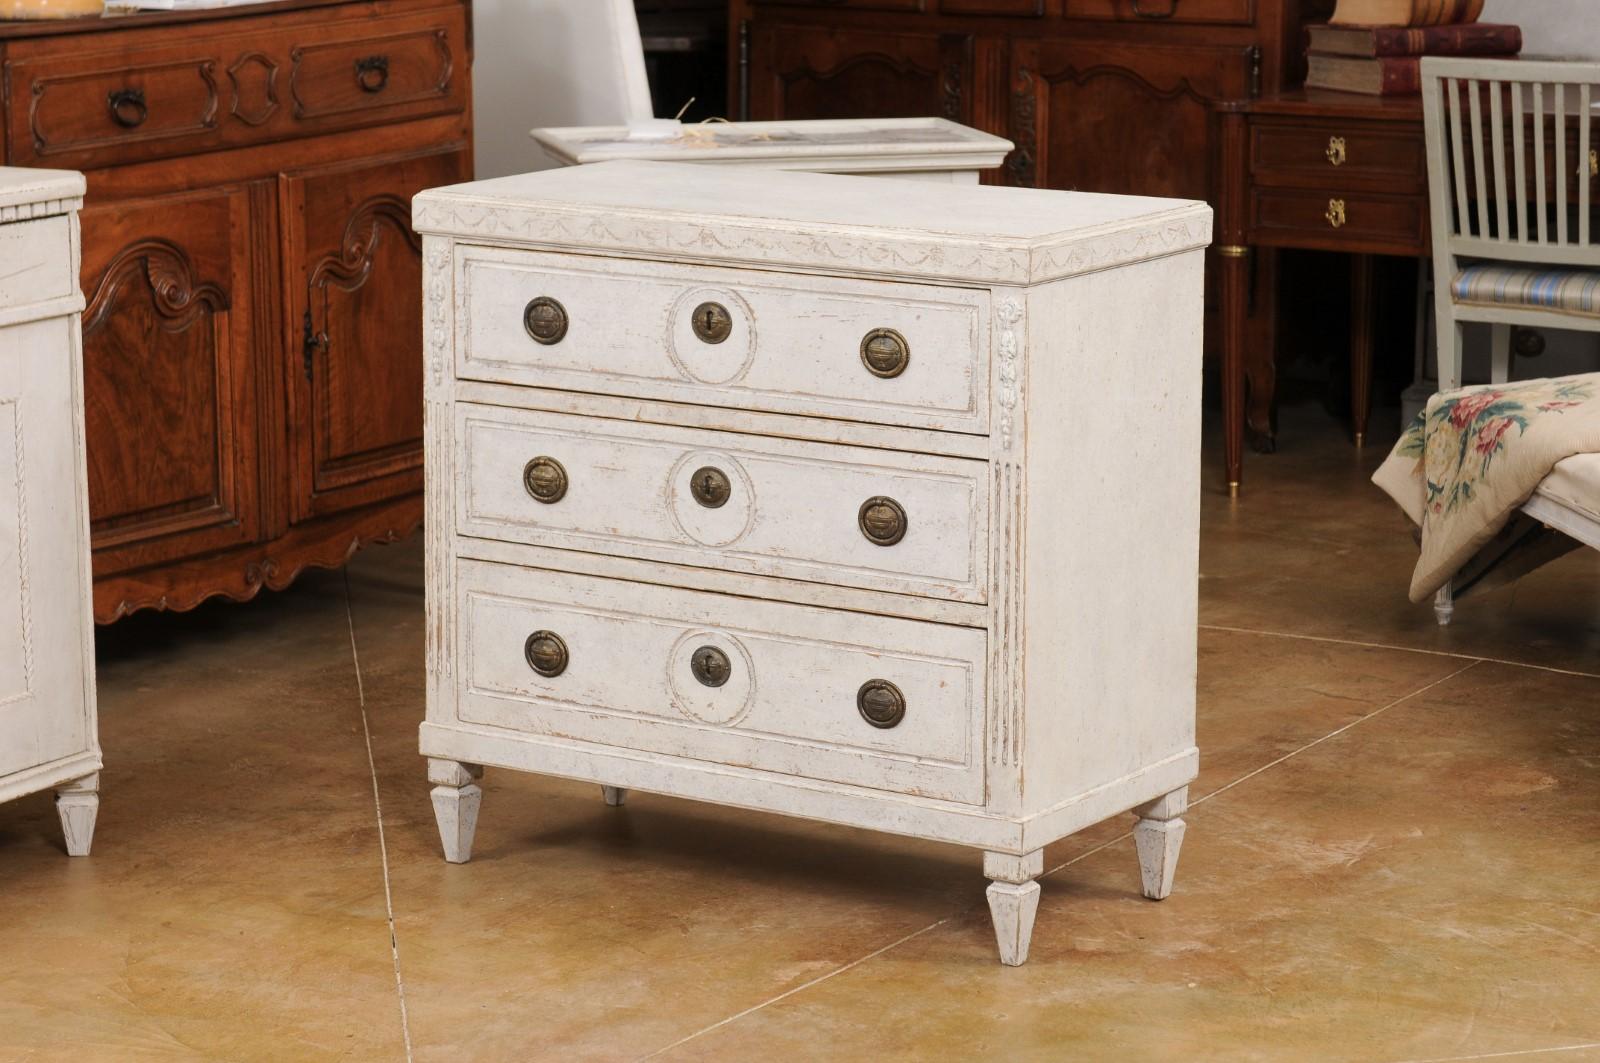 A Swedish Gustavian style painted wood chest of drawers from the late 19th century, with swag frieze, carved side posts and tapered feet. Created in Sweden during the last quarter of the 19th century, this painted chest showcases the stylistic